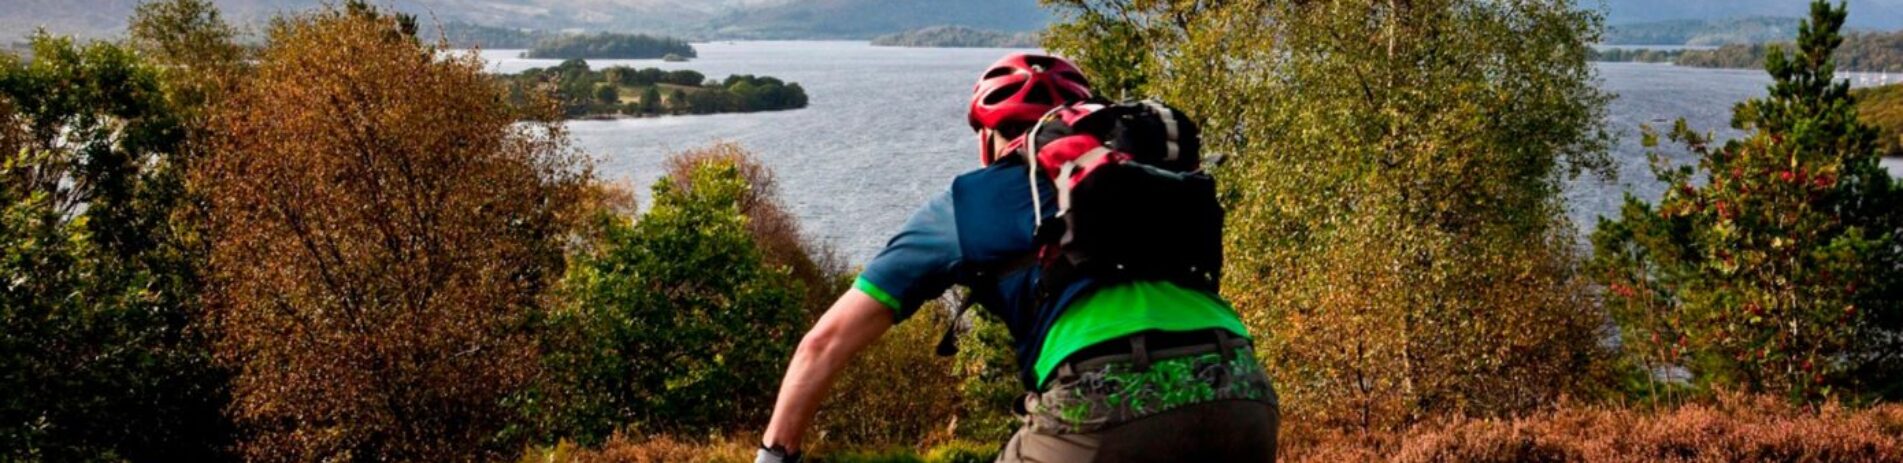 make-cyclist-on-bike-heading-downhill-with-forest-and-loch-lomond-in-the-distance-in-front-of-him